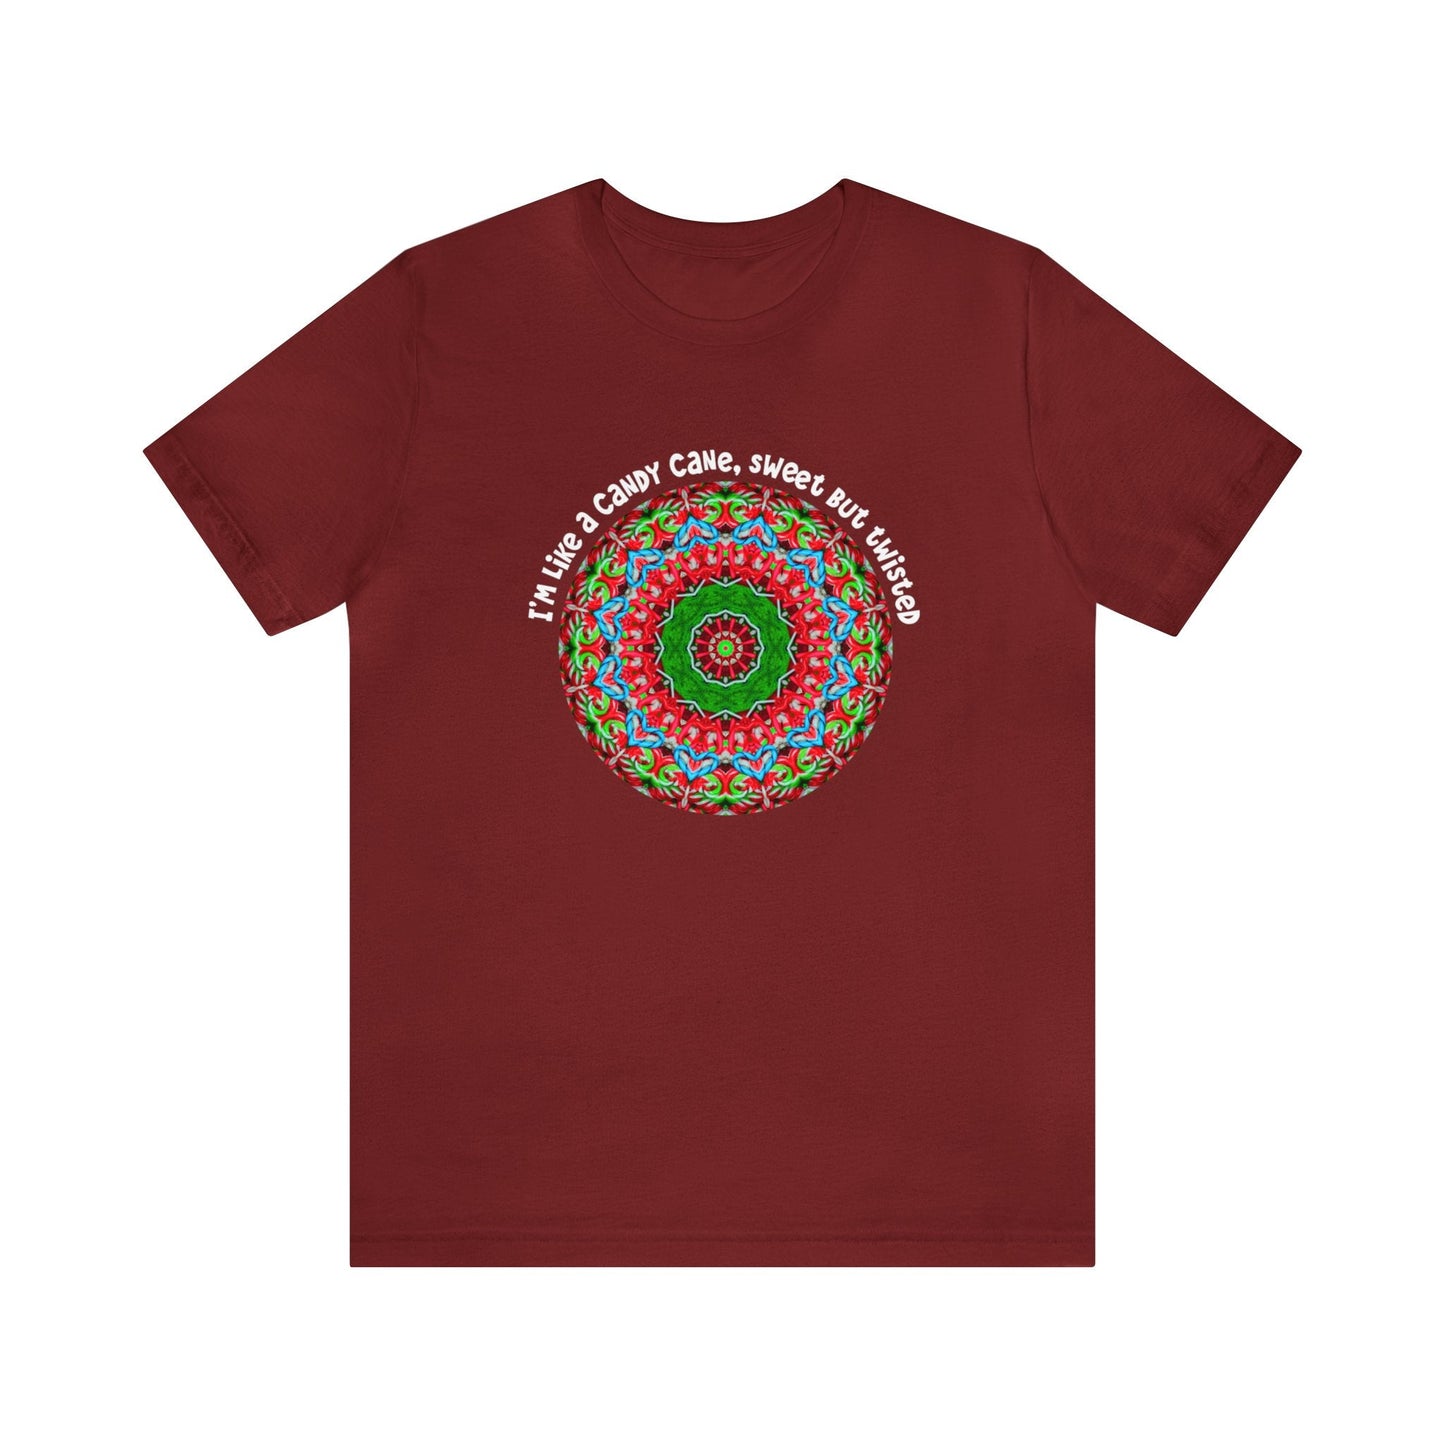 Sarcastic Funny Christmas Shirt - All Day Graphic TShirts, Im like a candy cane cute but twisted Candy Cane Mandala Cardinal Red